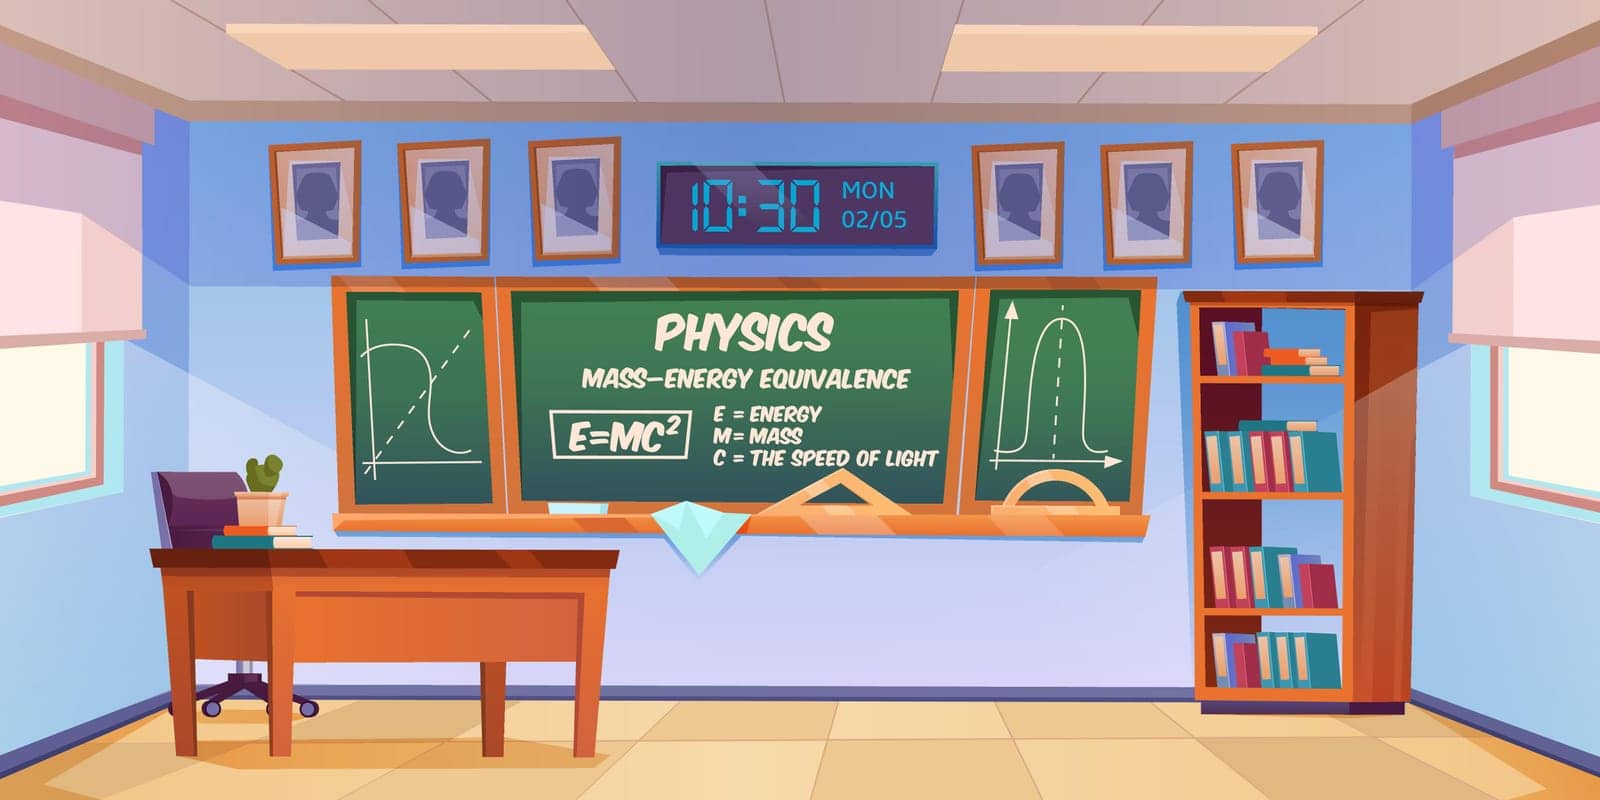 Classroom for physics learning with formula and graph on chalkboard. Vector cartoon illustration of empty school class interior with teacher desk, blackboard and bookcase